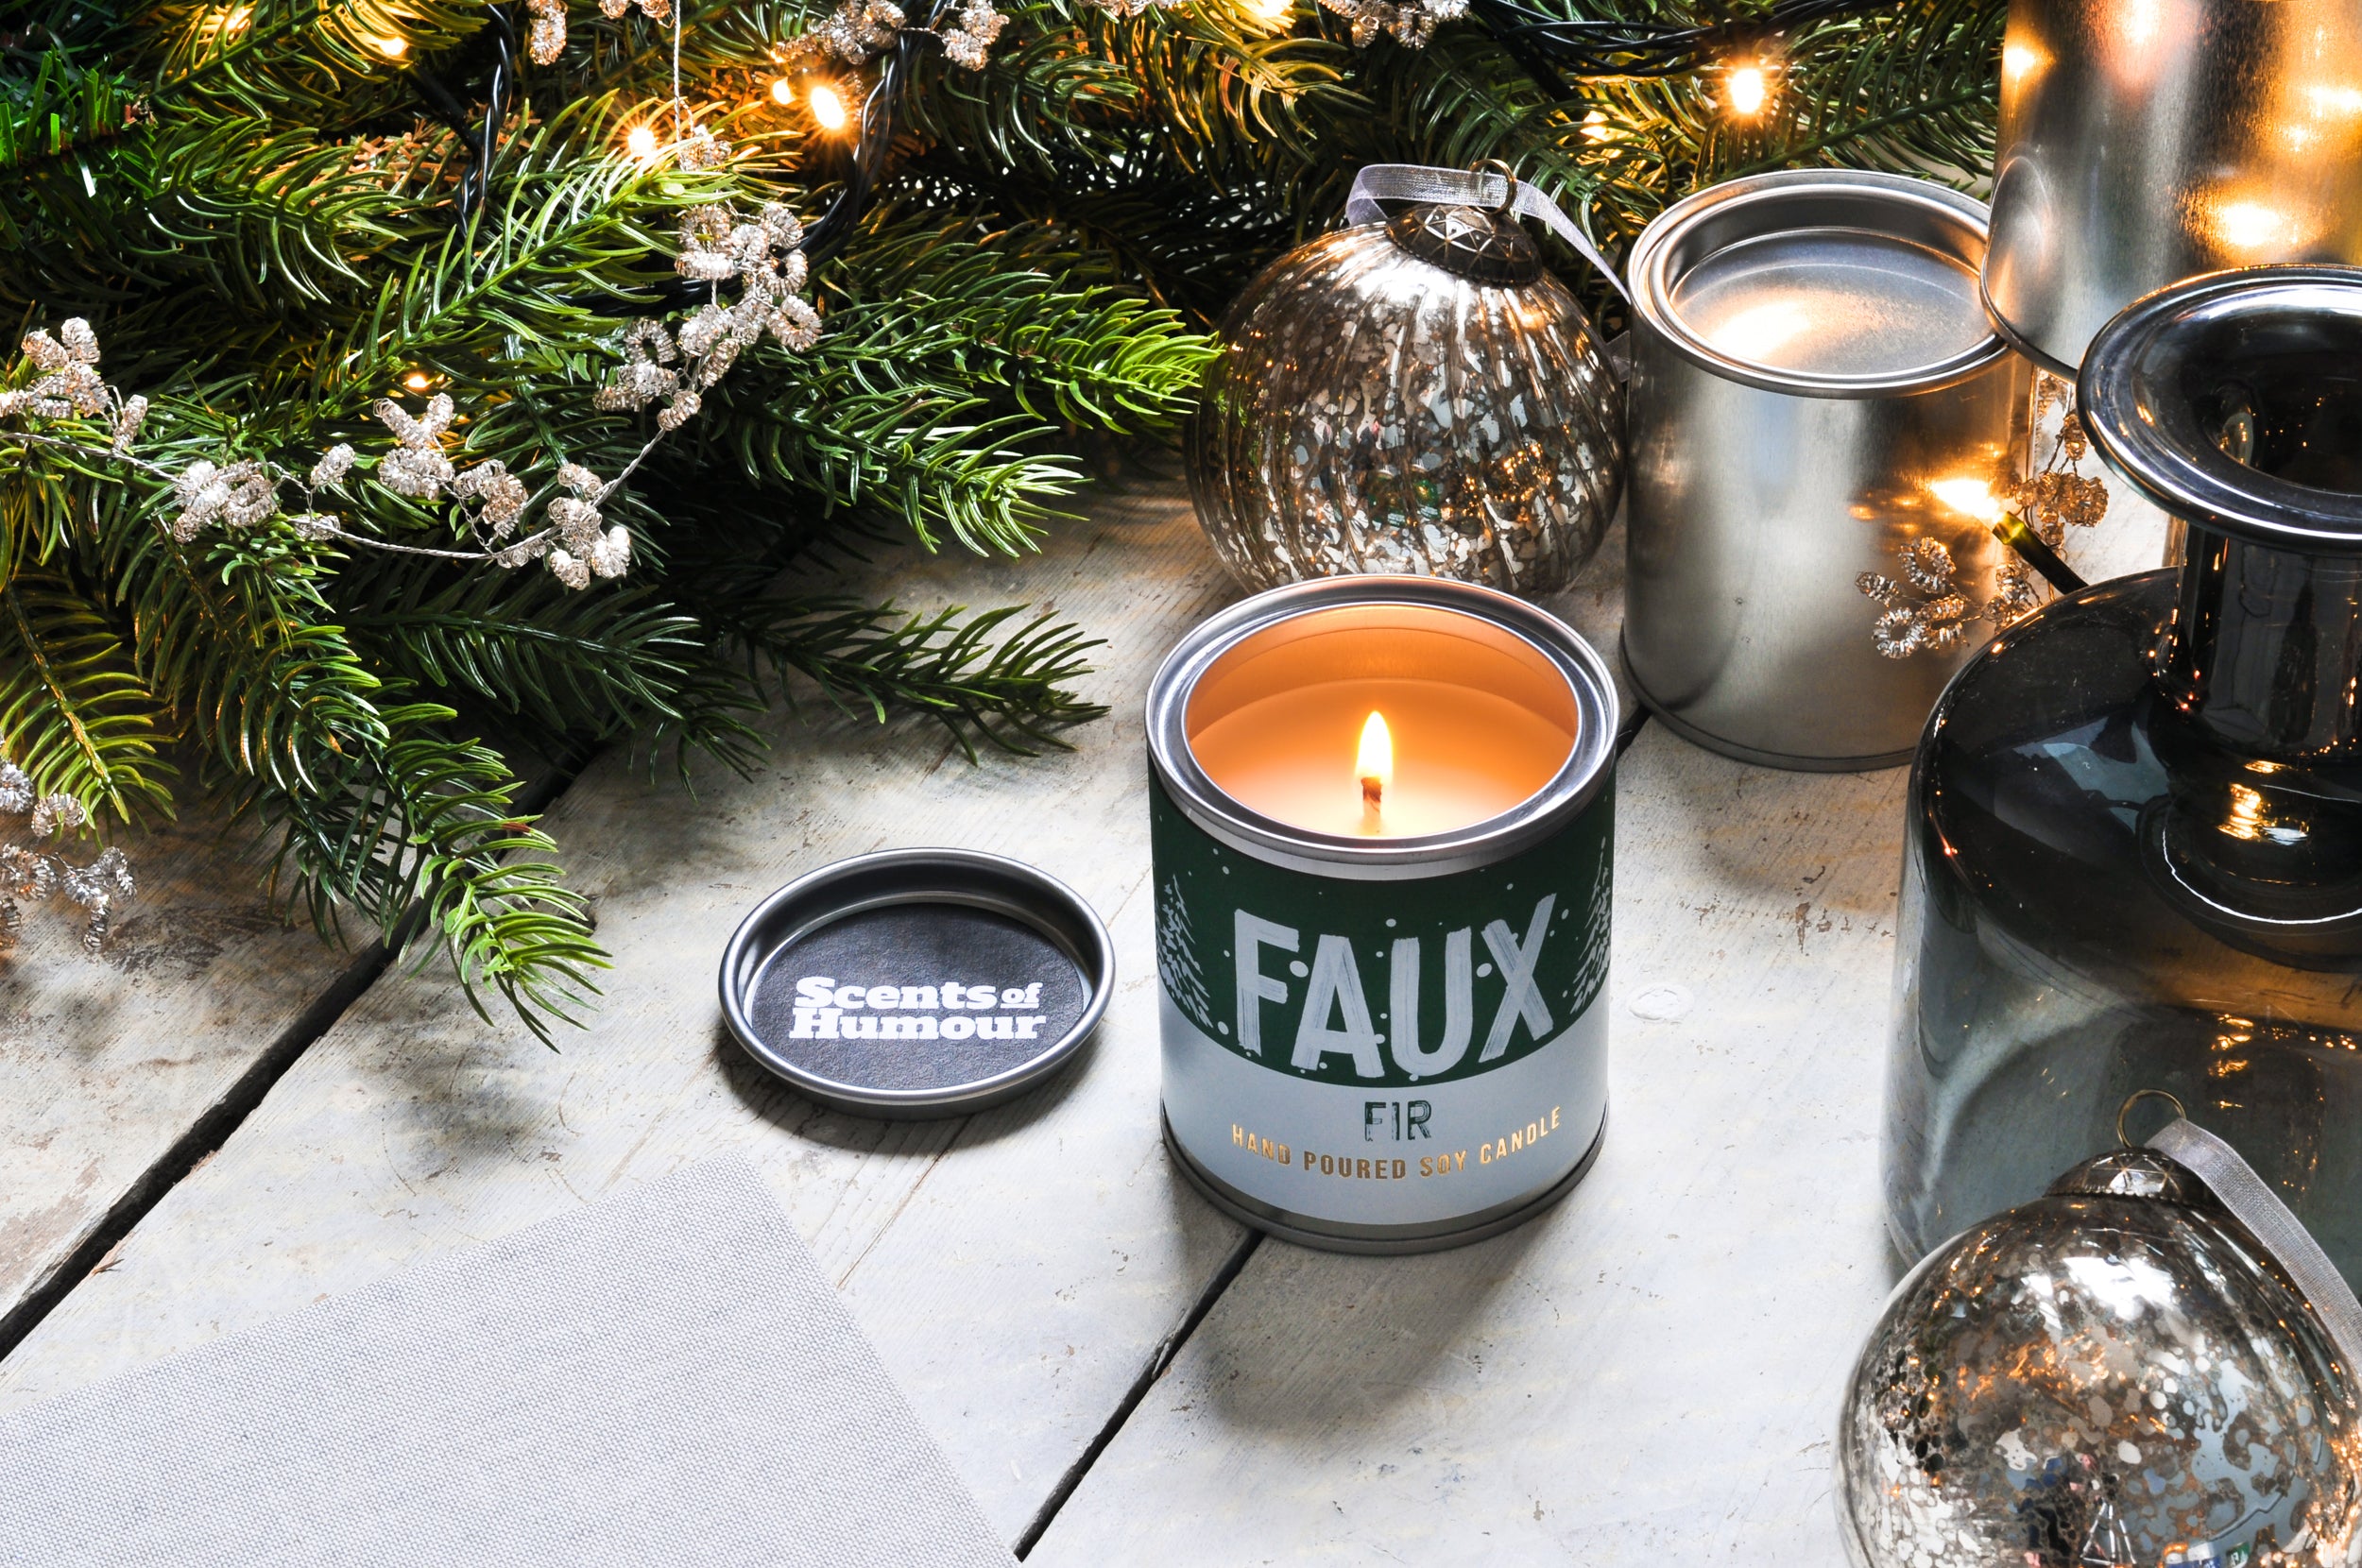 Faux Fir - Christmas Tree Scented Candle